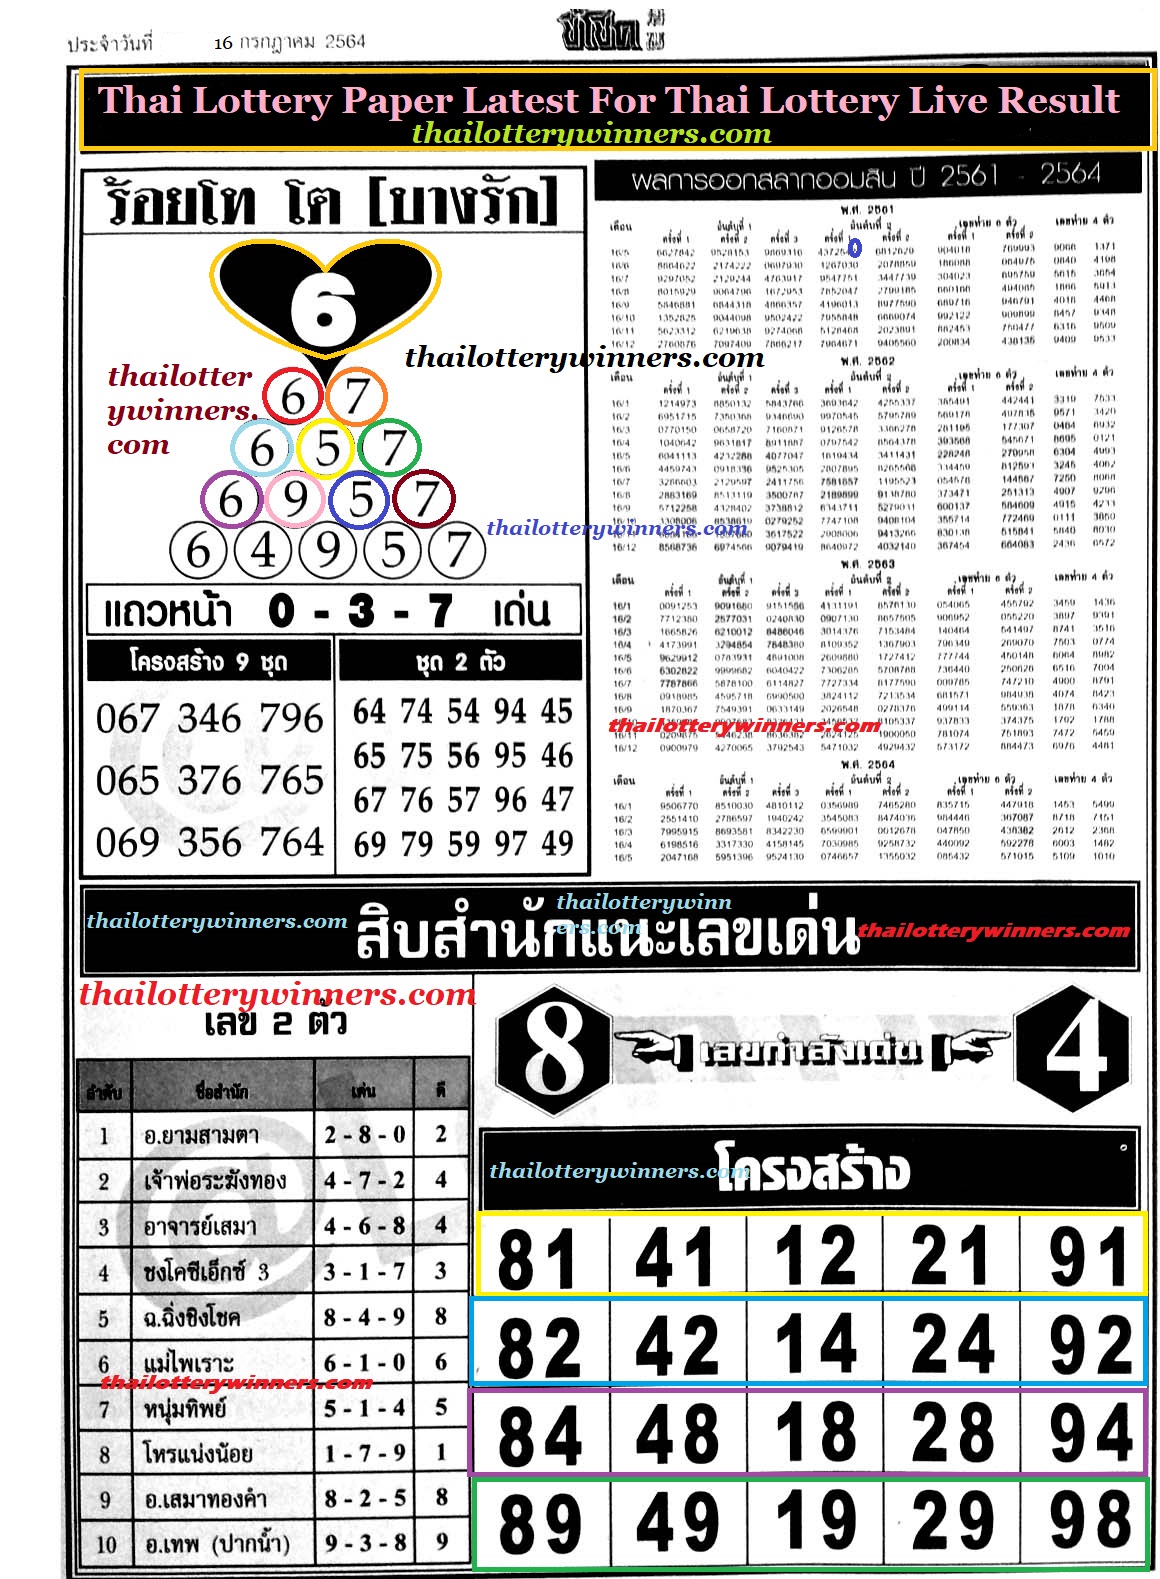 Thailand lottery result sure paper